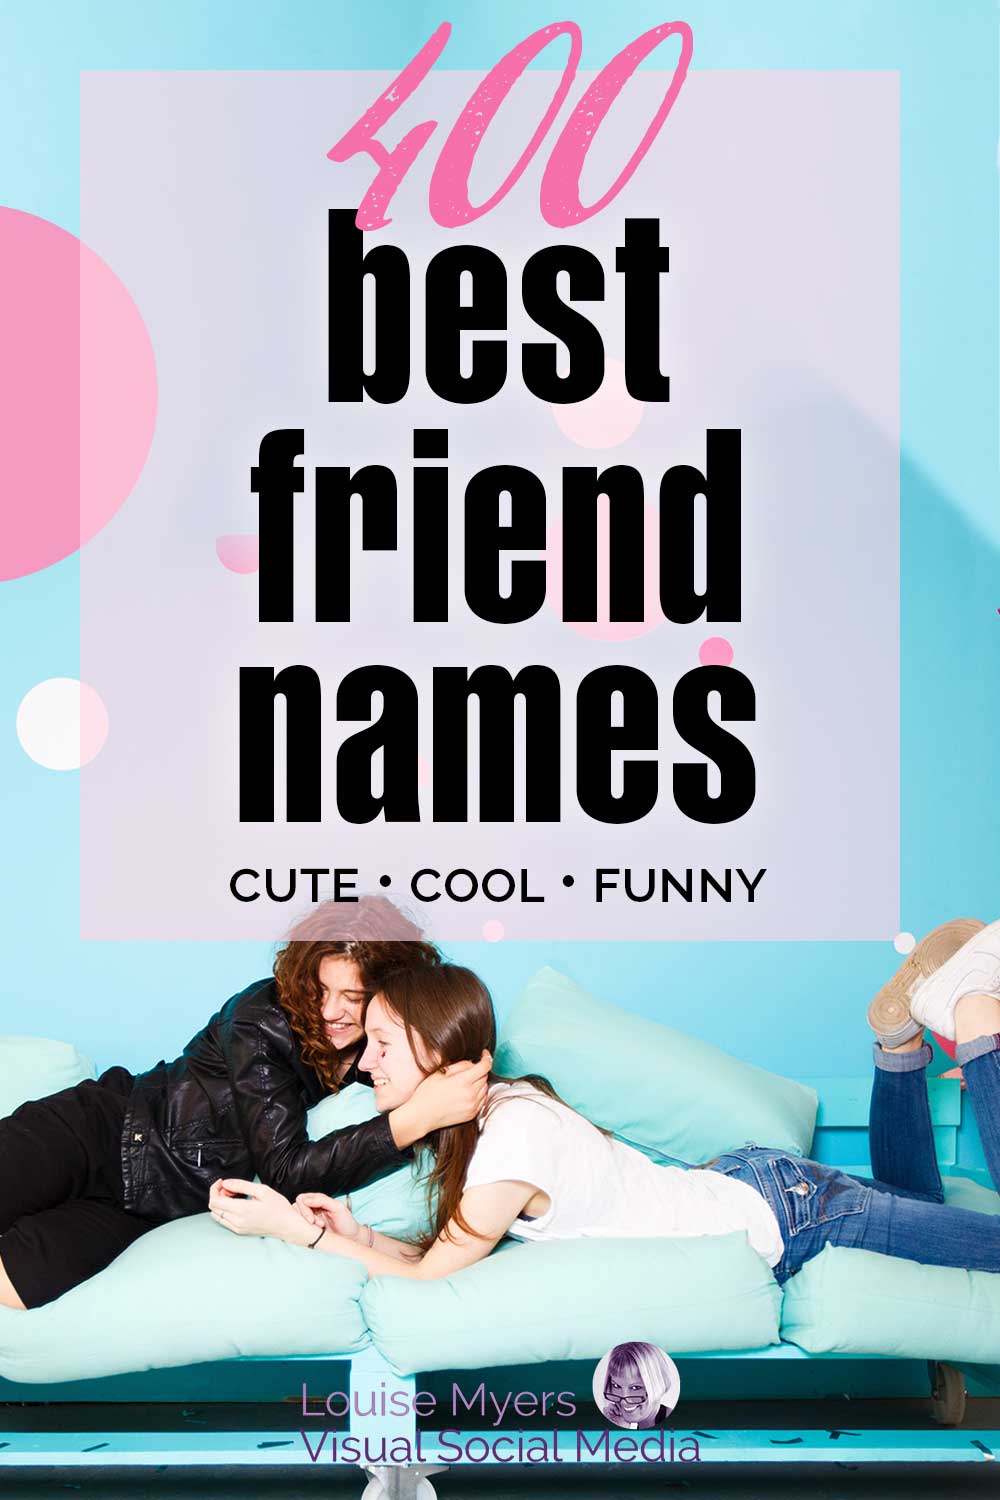 teens hugging in blue room with pink dots has text 400 best friend names.